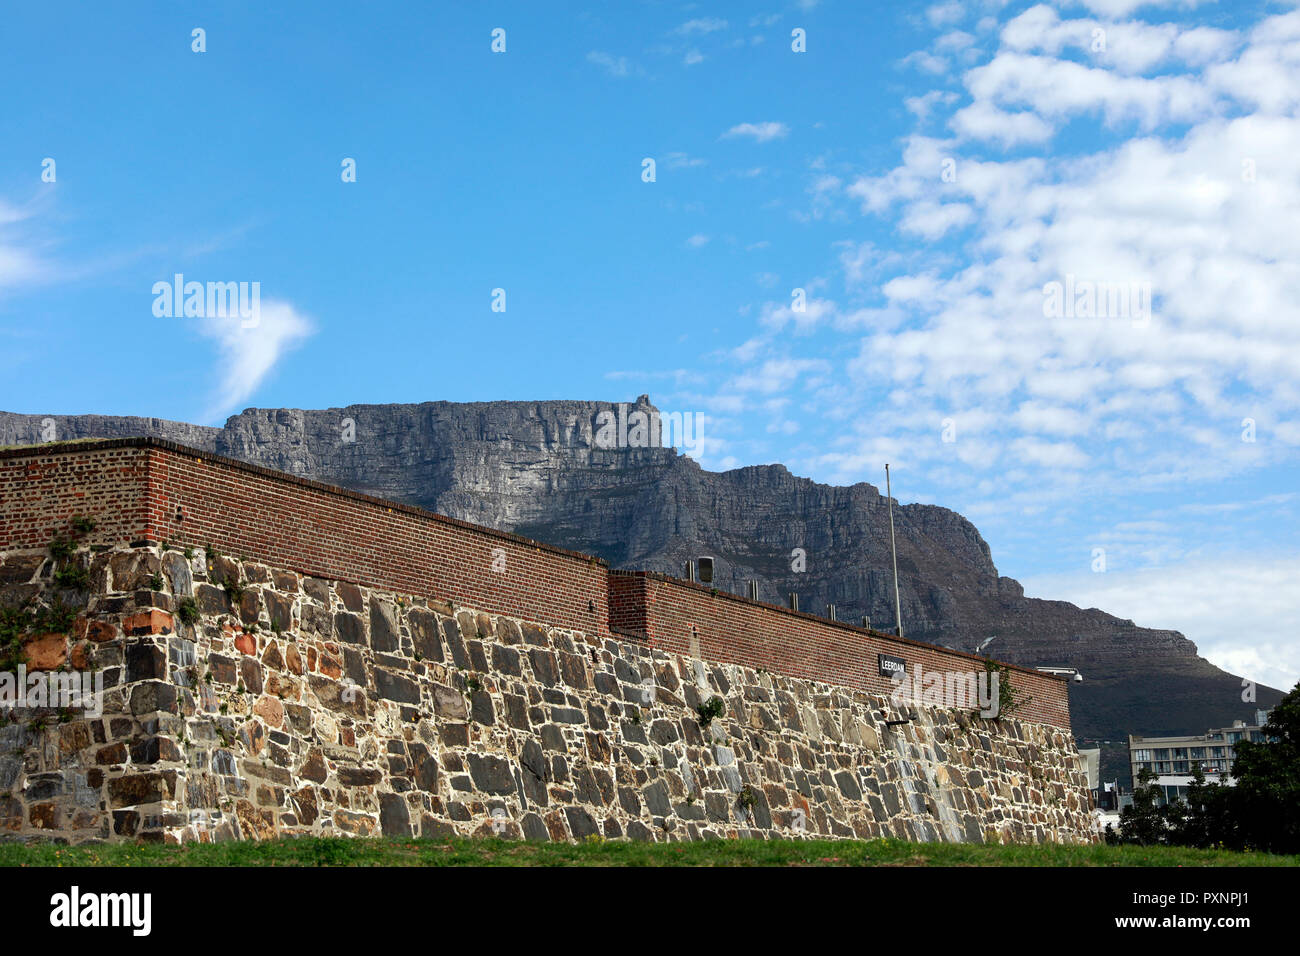 The Castle of Good Hope known locally as the Castle or Cape Town Castle is a popular tourist attraction for people visiting the Mother City. Stock Photo